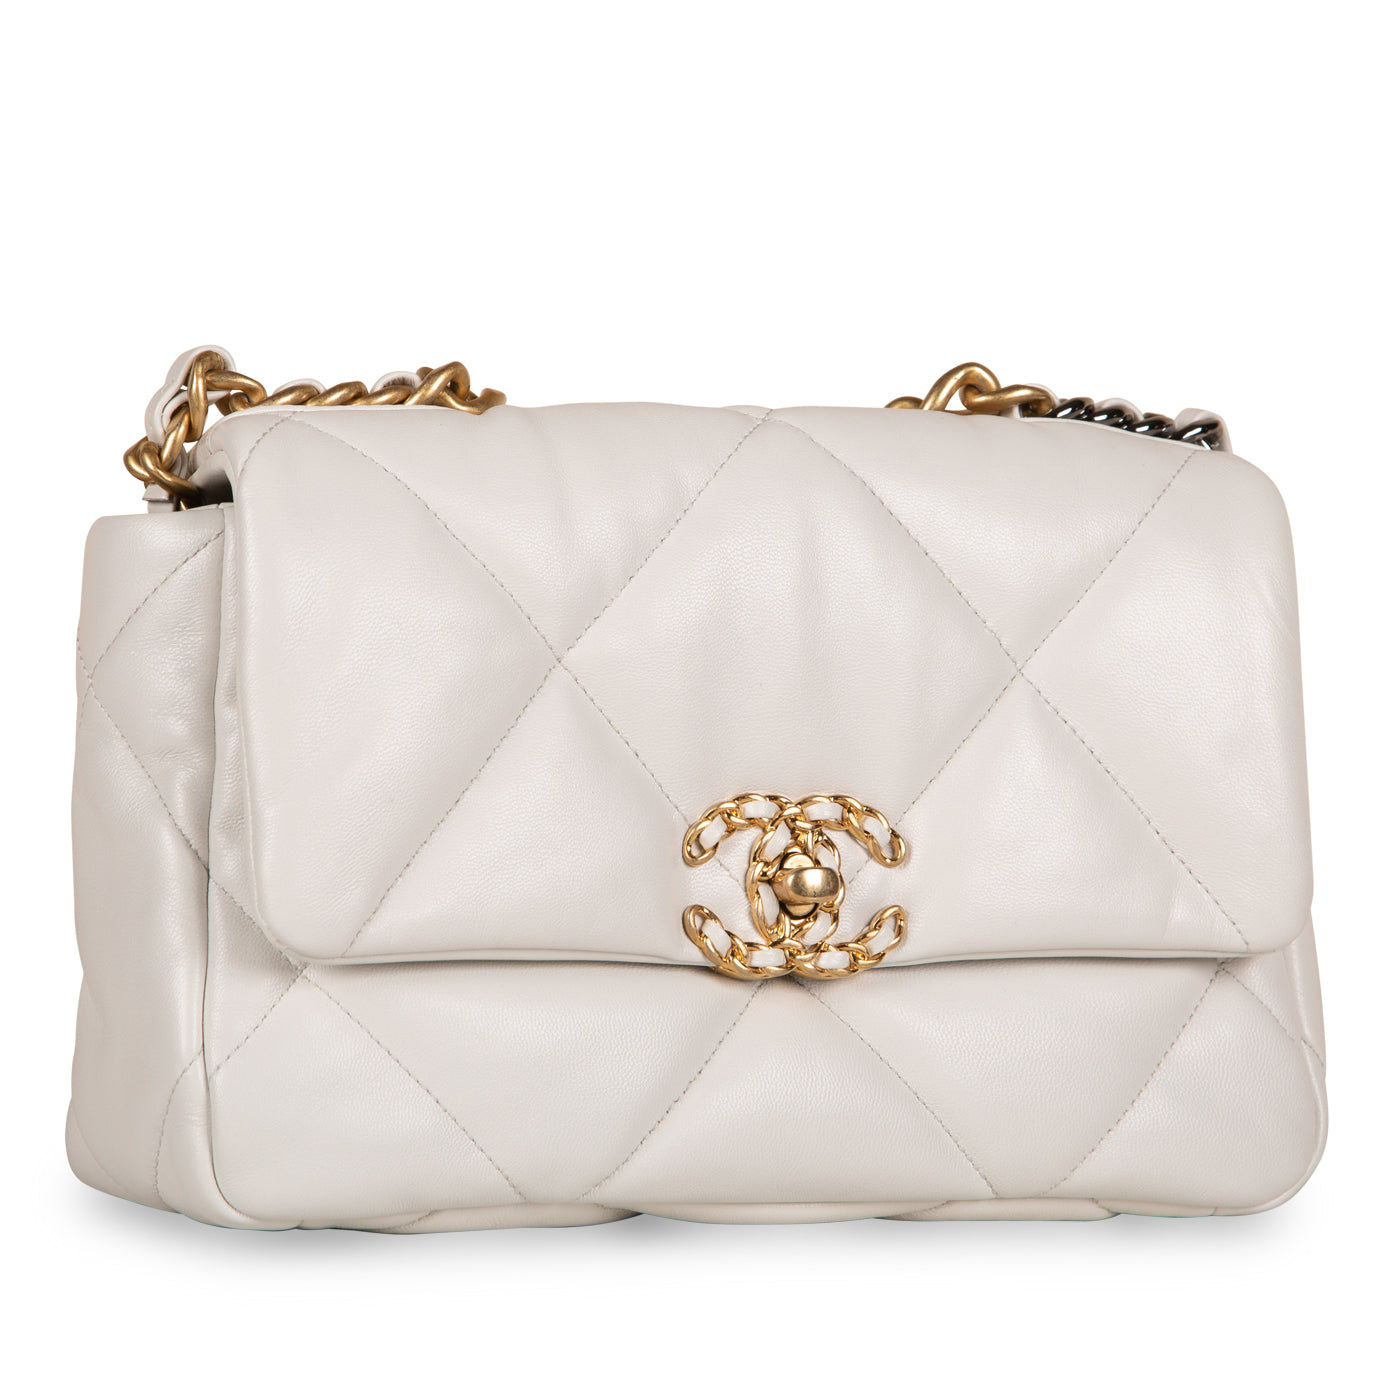 CHANEL Lambskin Quilted Medium Chanel 19 Flap White 507249  FASHIONPHILE